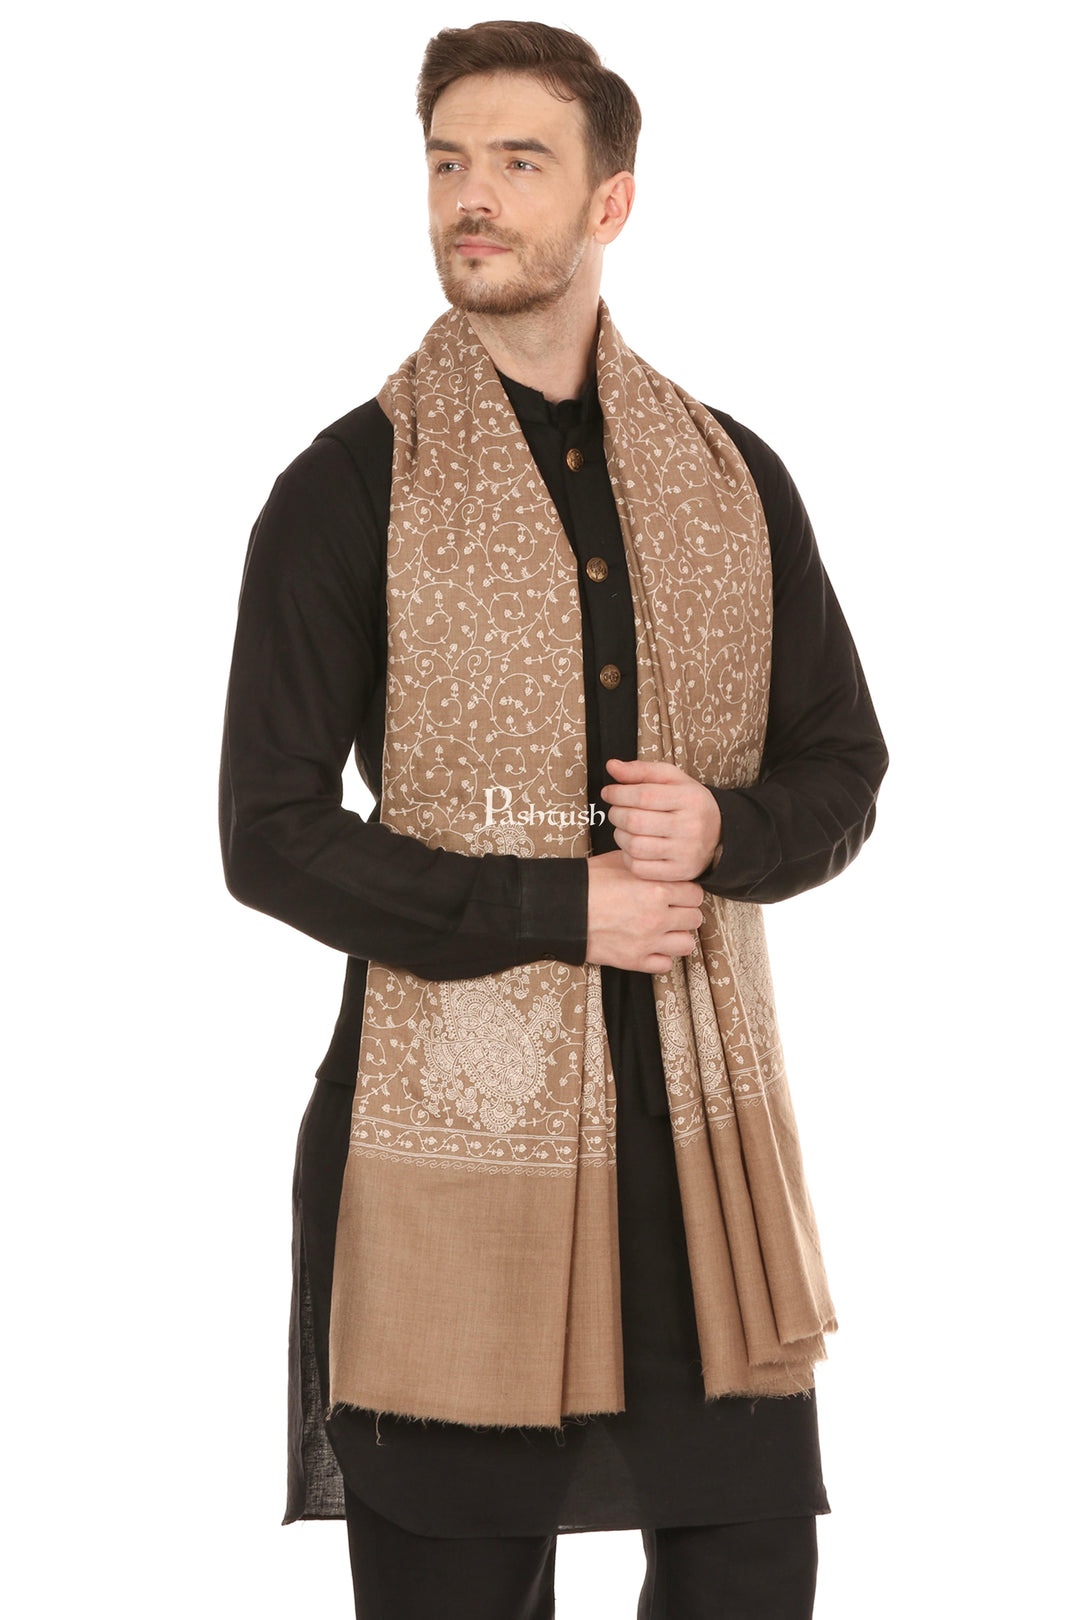 Pashtush India Mens Scarves Stoles and Mufflers Pashtush Mens Tone On Tone Embroidery Stole - Natural Beige